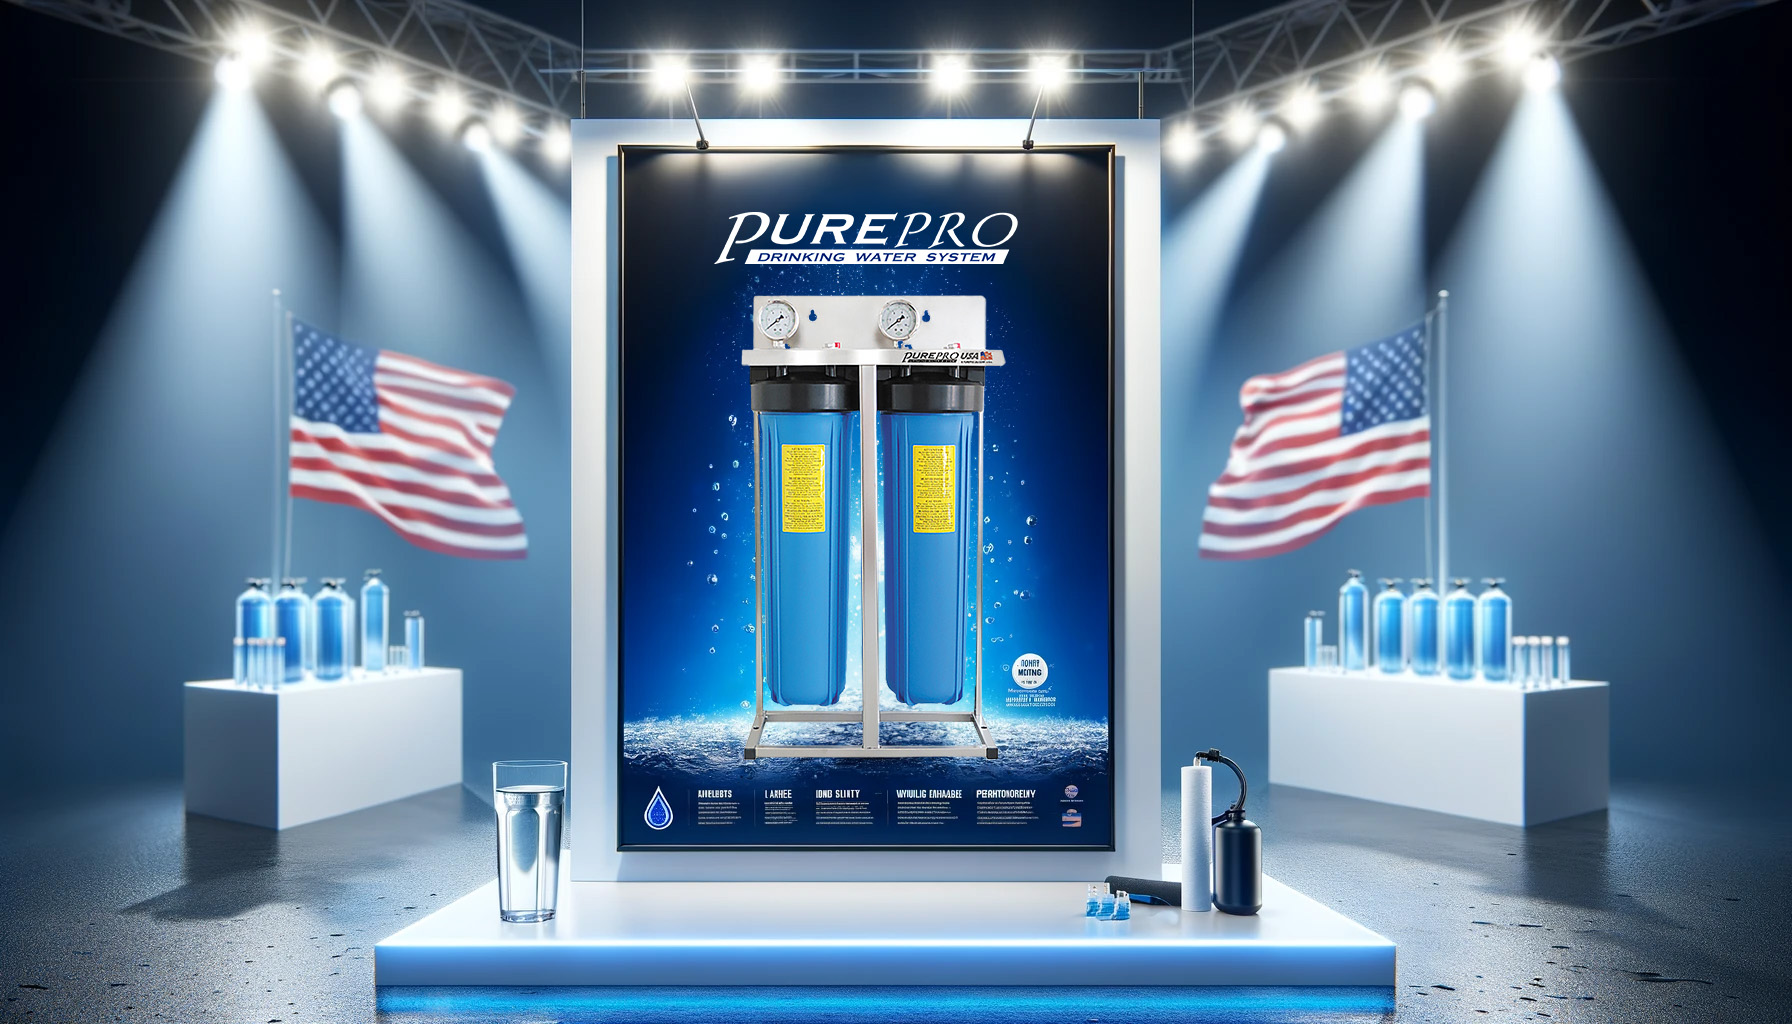 PURE-PRO is proud to present our groundbreaking Whole House Water Filtration System